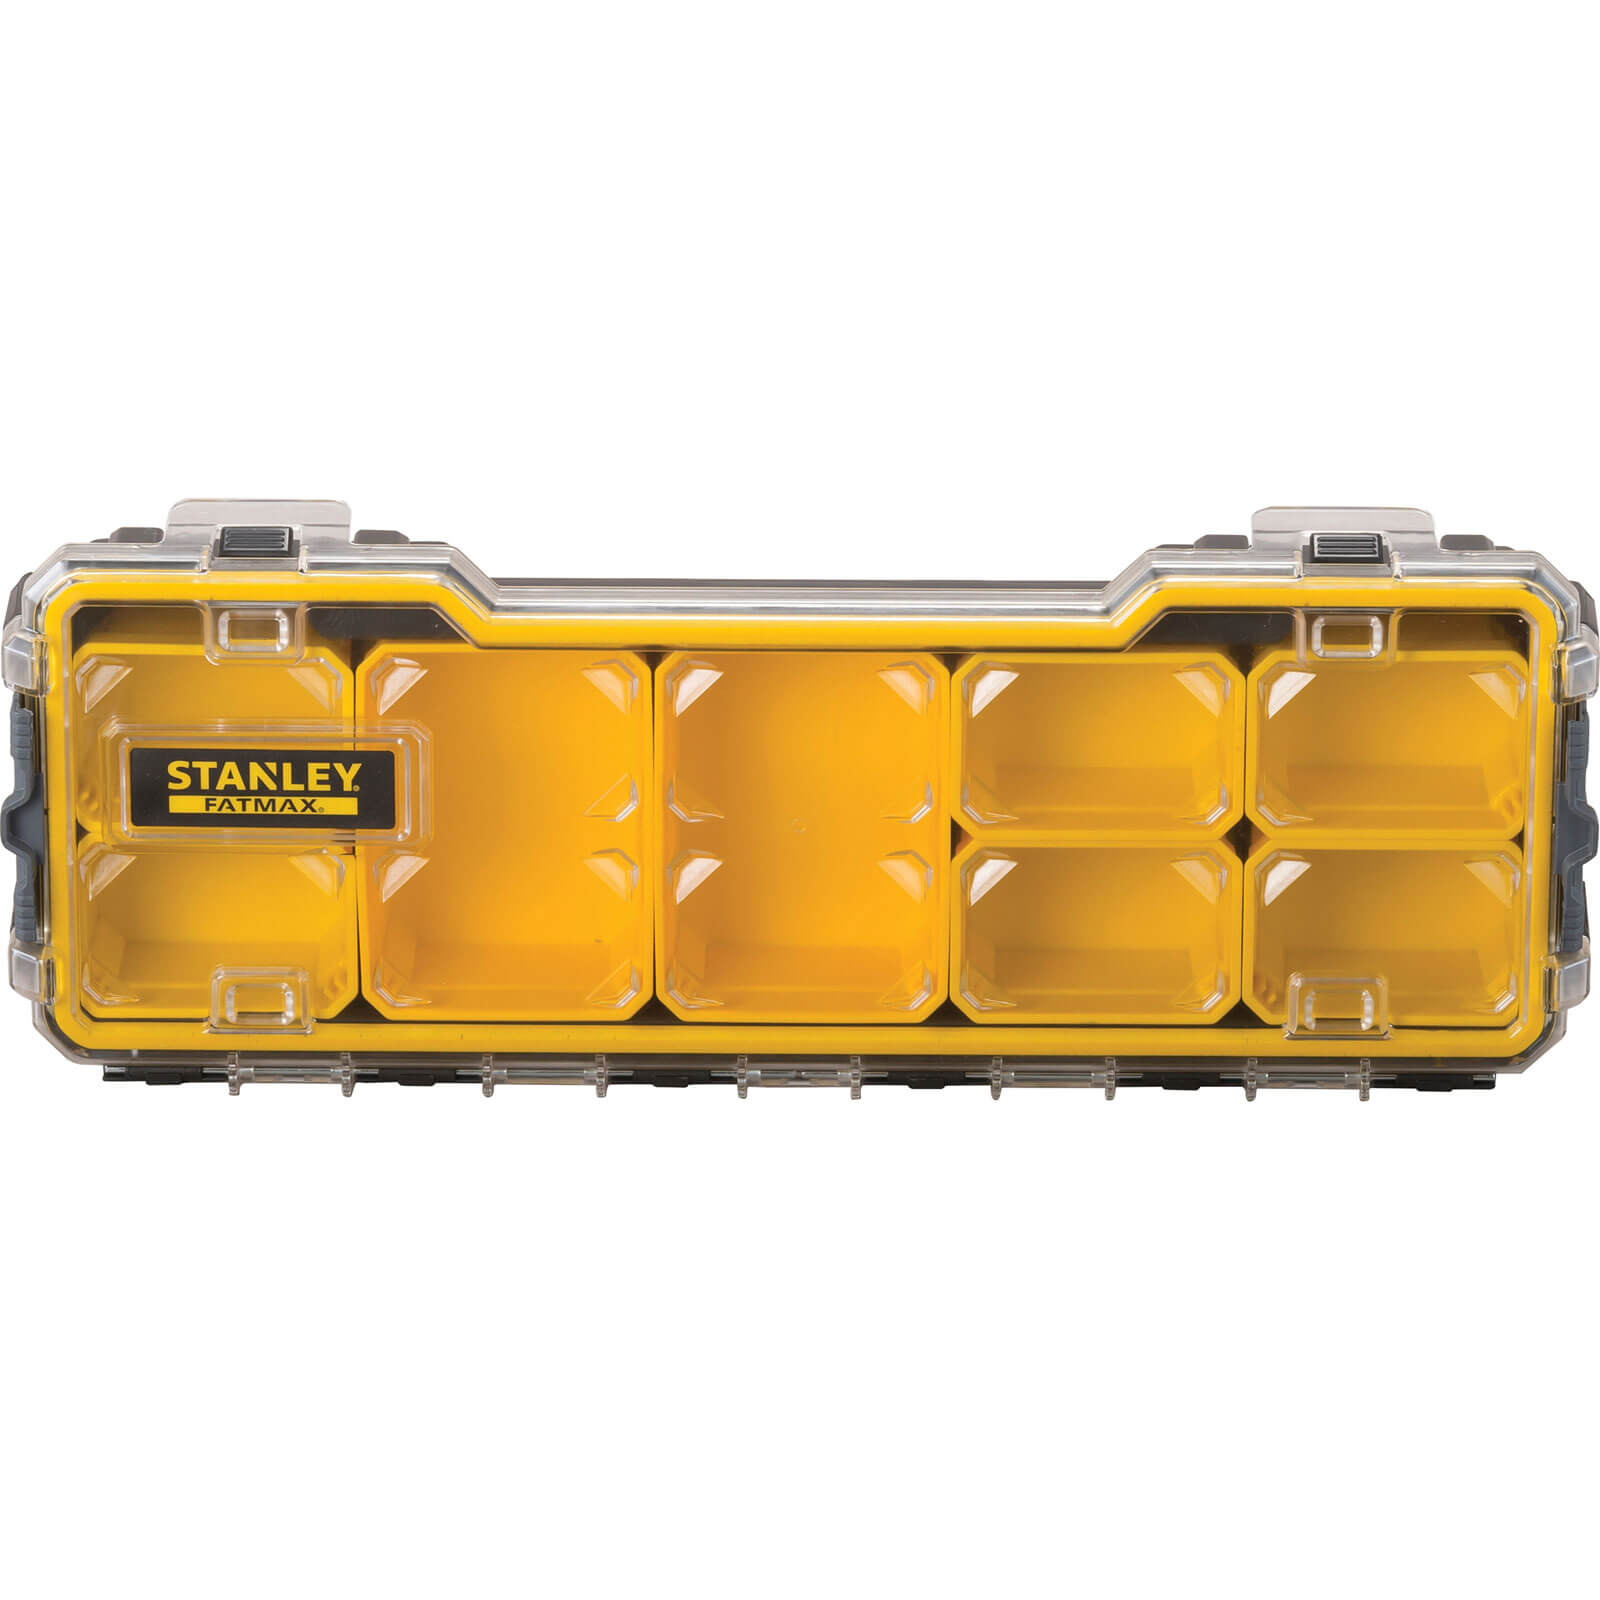 Image of Stanley FatMax 1/3 Shallow Professional Organiser